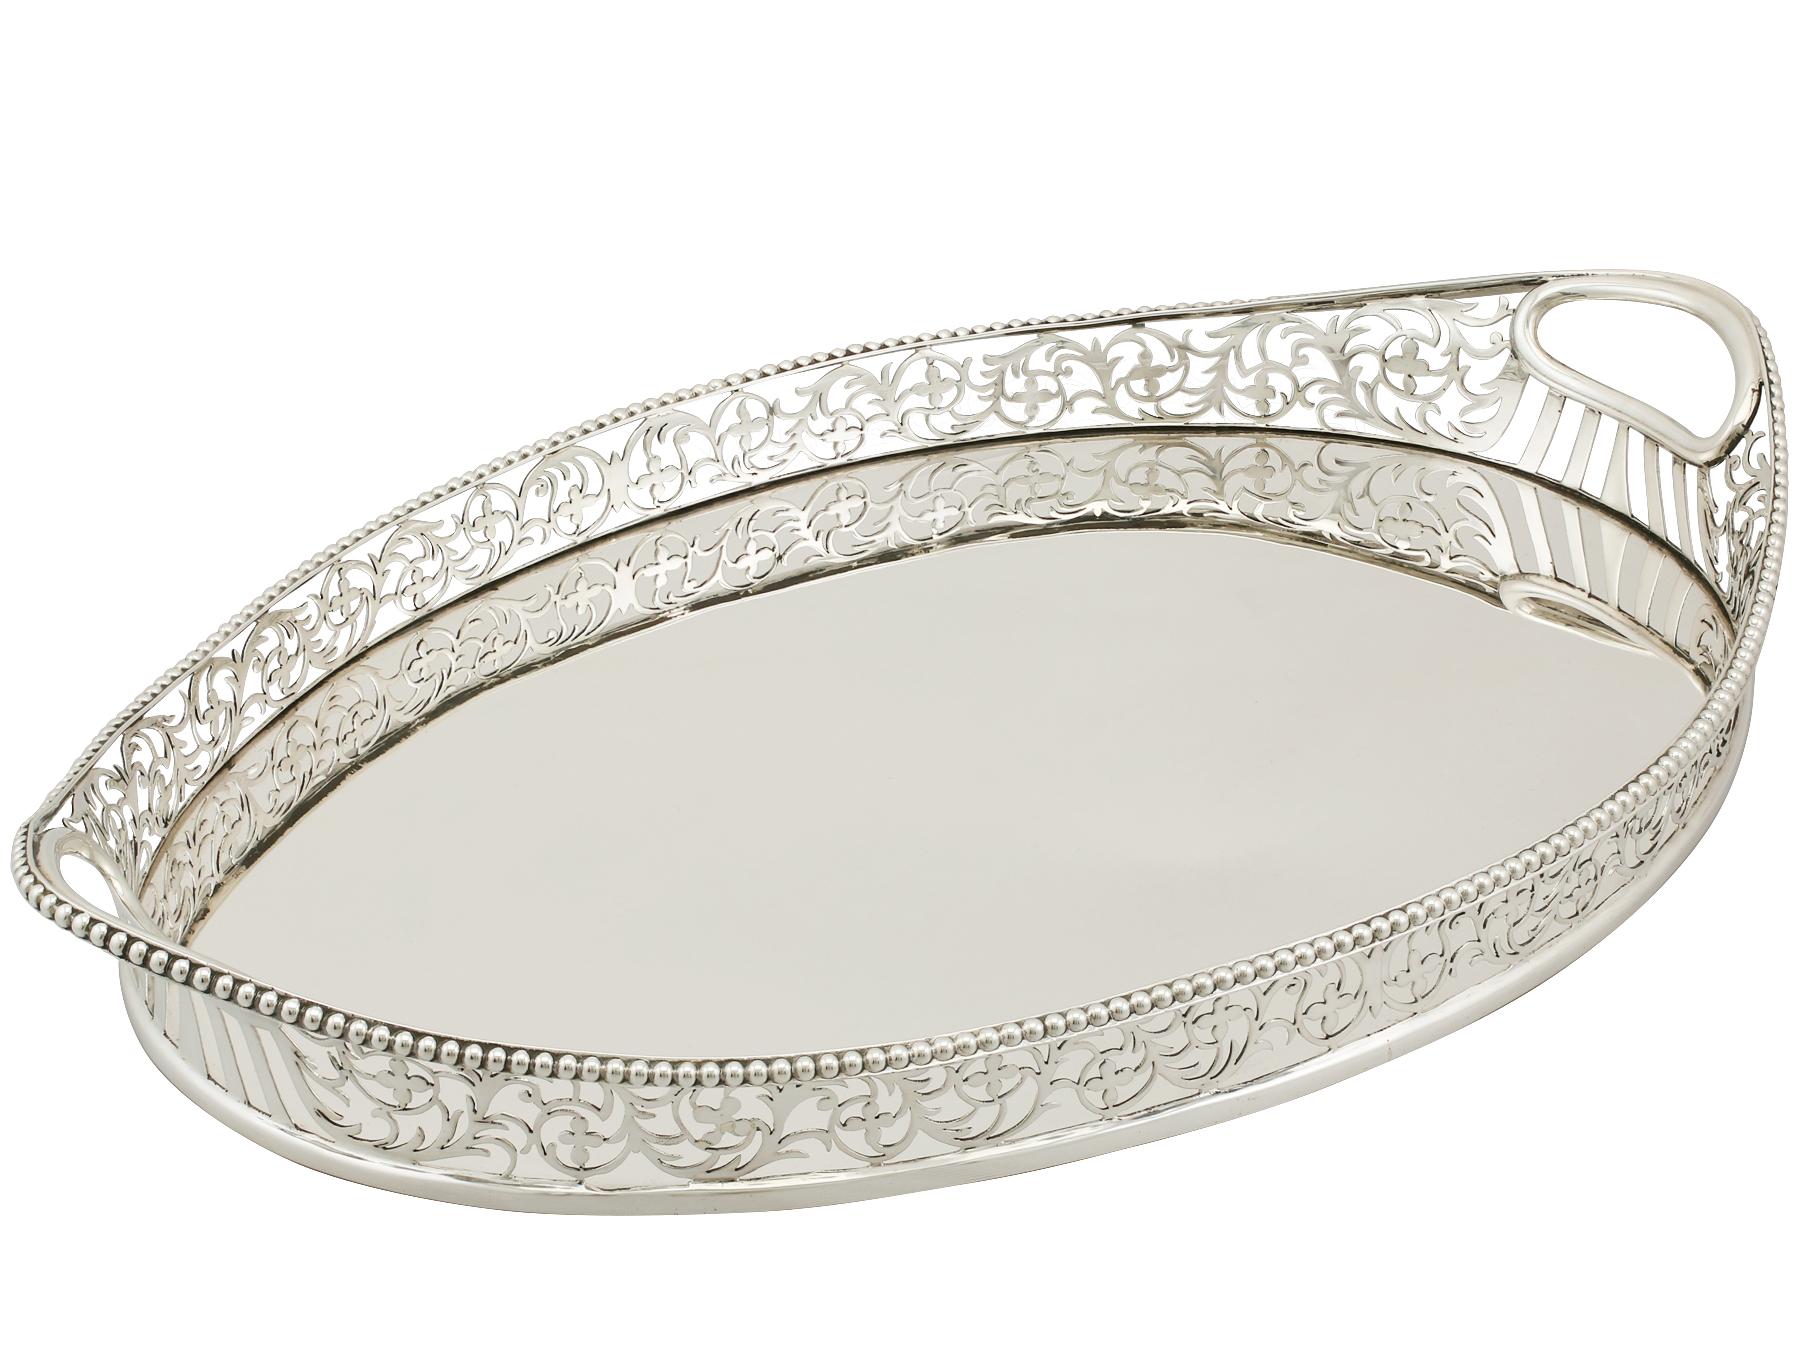 An exceptional, fine and impressive antique Edwardian English sterling silver galleried drinks tray made by Charles Stuart Harris; an addition to our Edwardian teaware collection.

This exceptional antique Edwardian sterling silver drinks tray has a